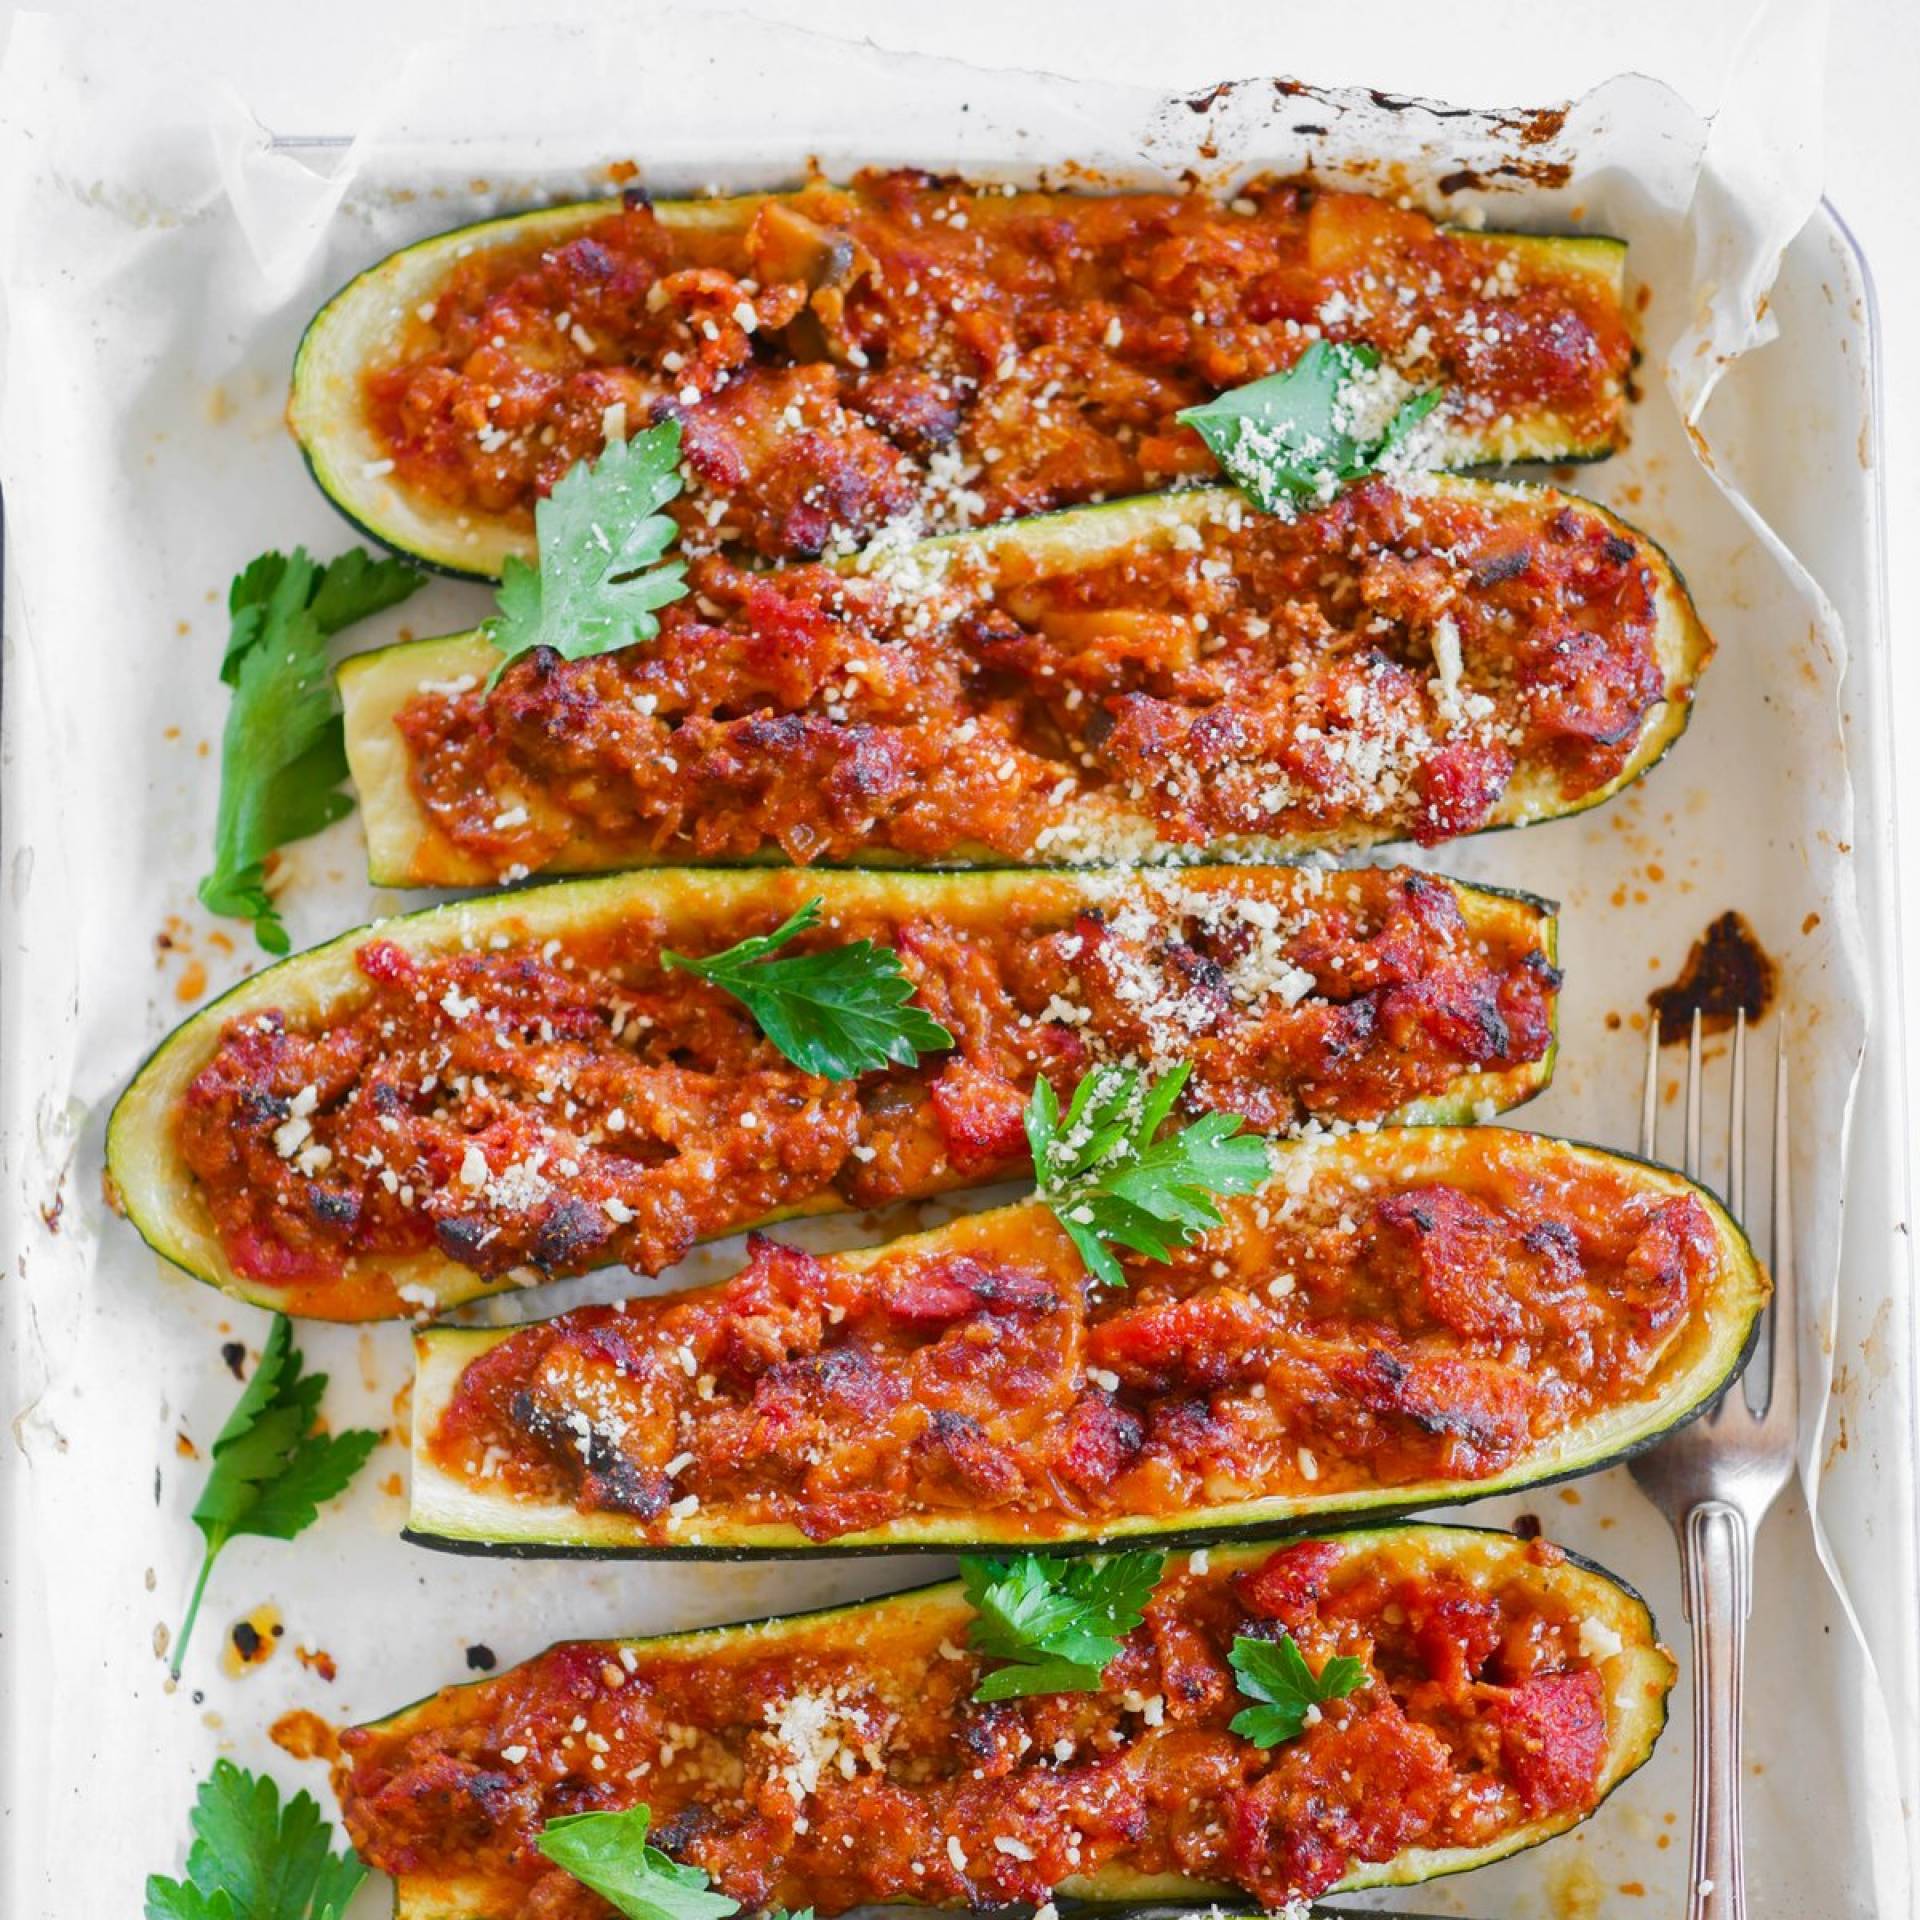 Whole30 Zucchini Boats Stuffed with Five eggs' Bolognese